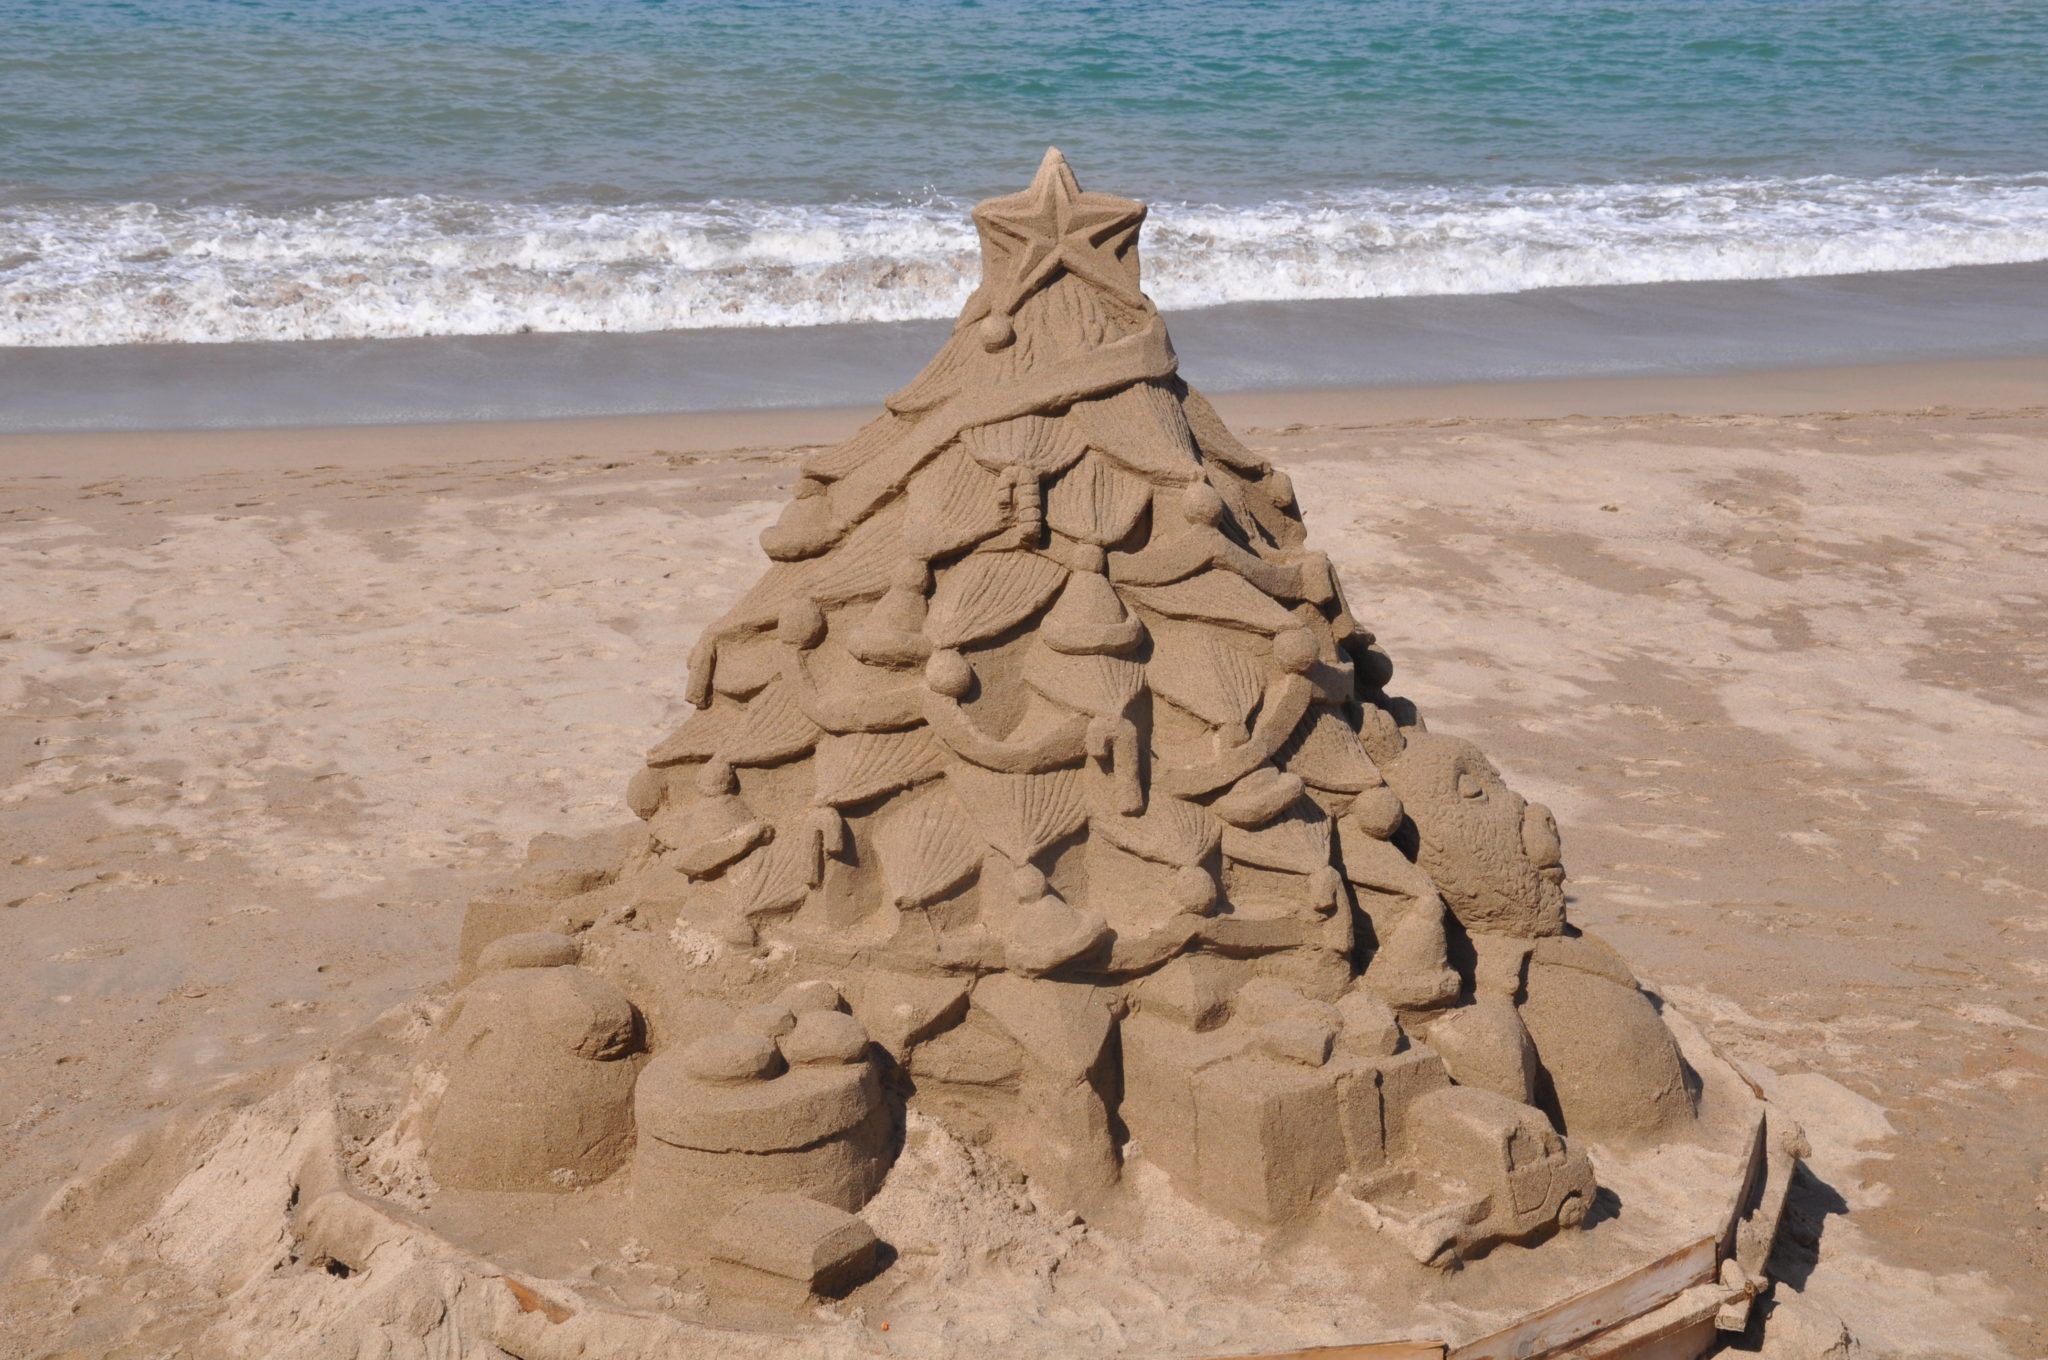 Sand sculpture of a Christmas tree on the beach in Mexico